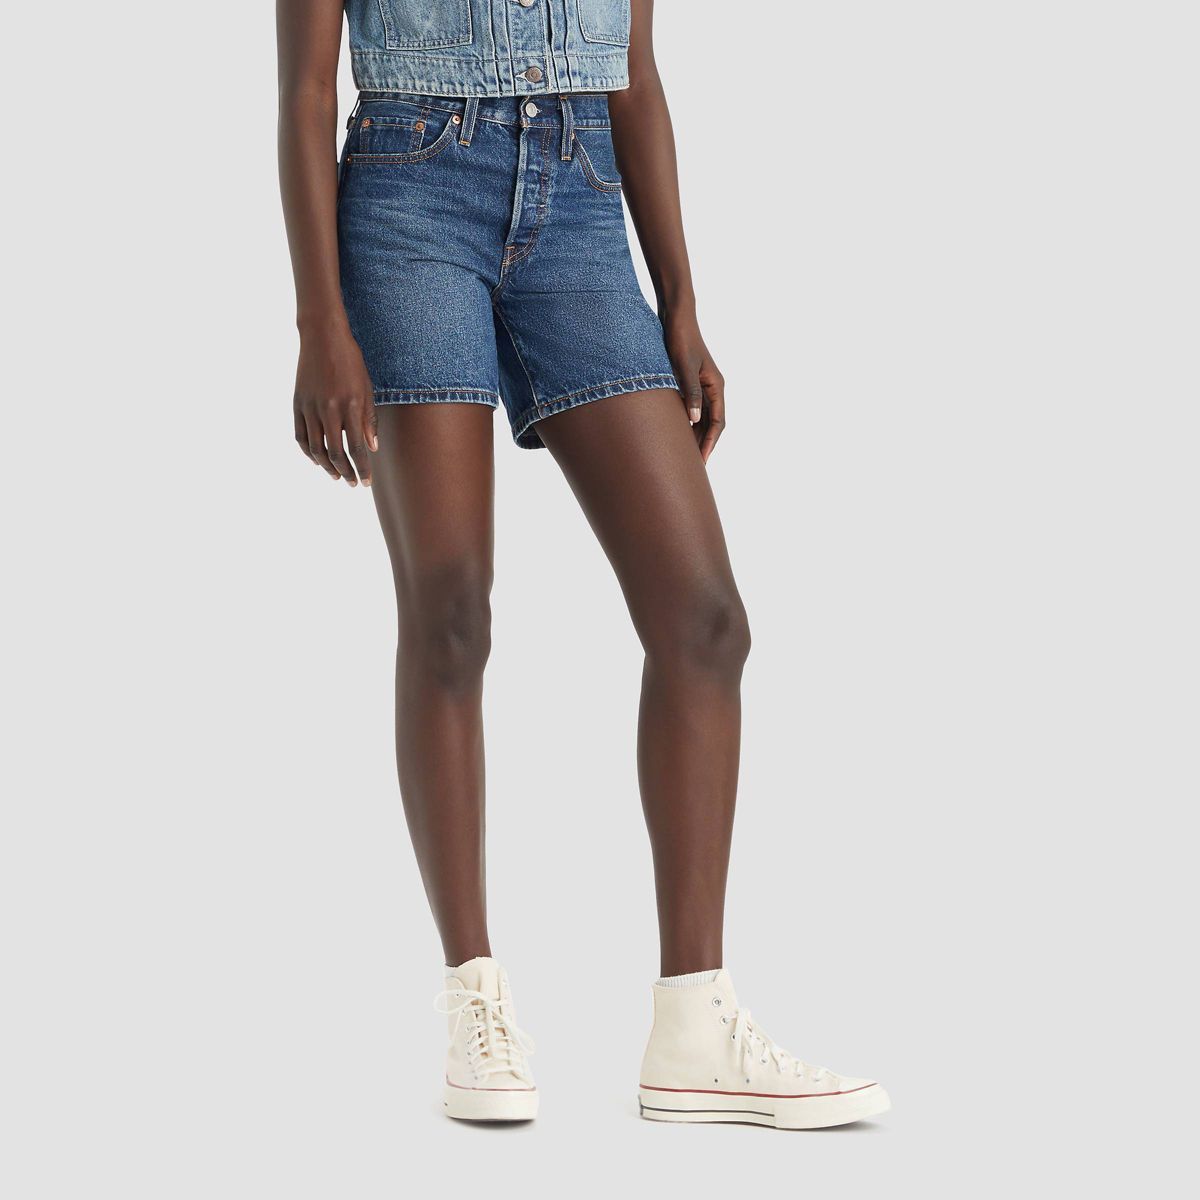 Levi's 501® Mid Thigh Women's Jean Shorts | Target